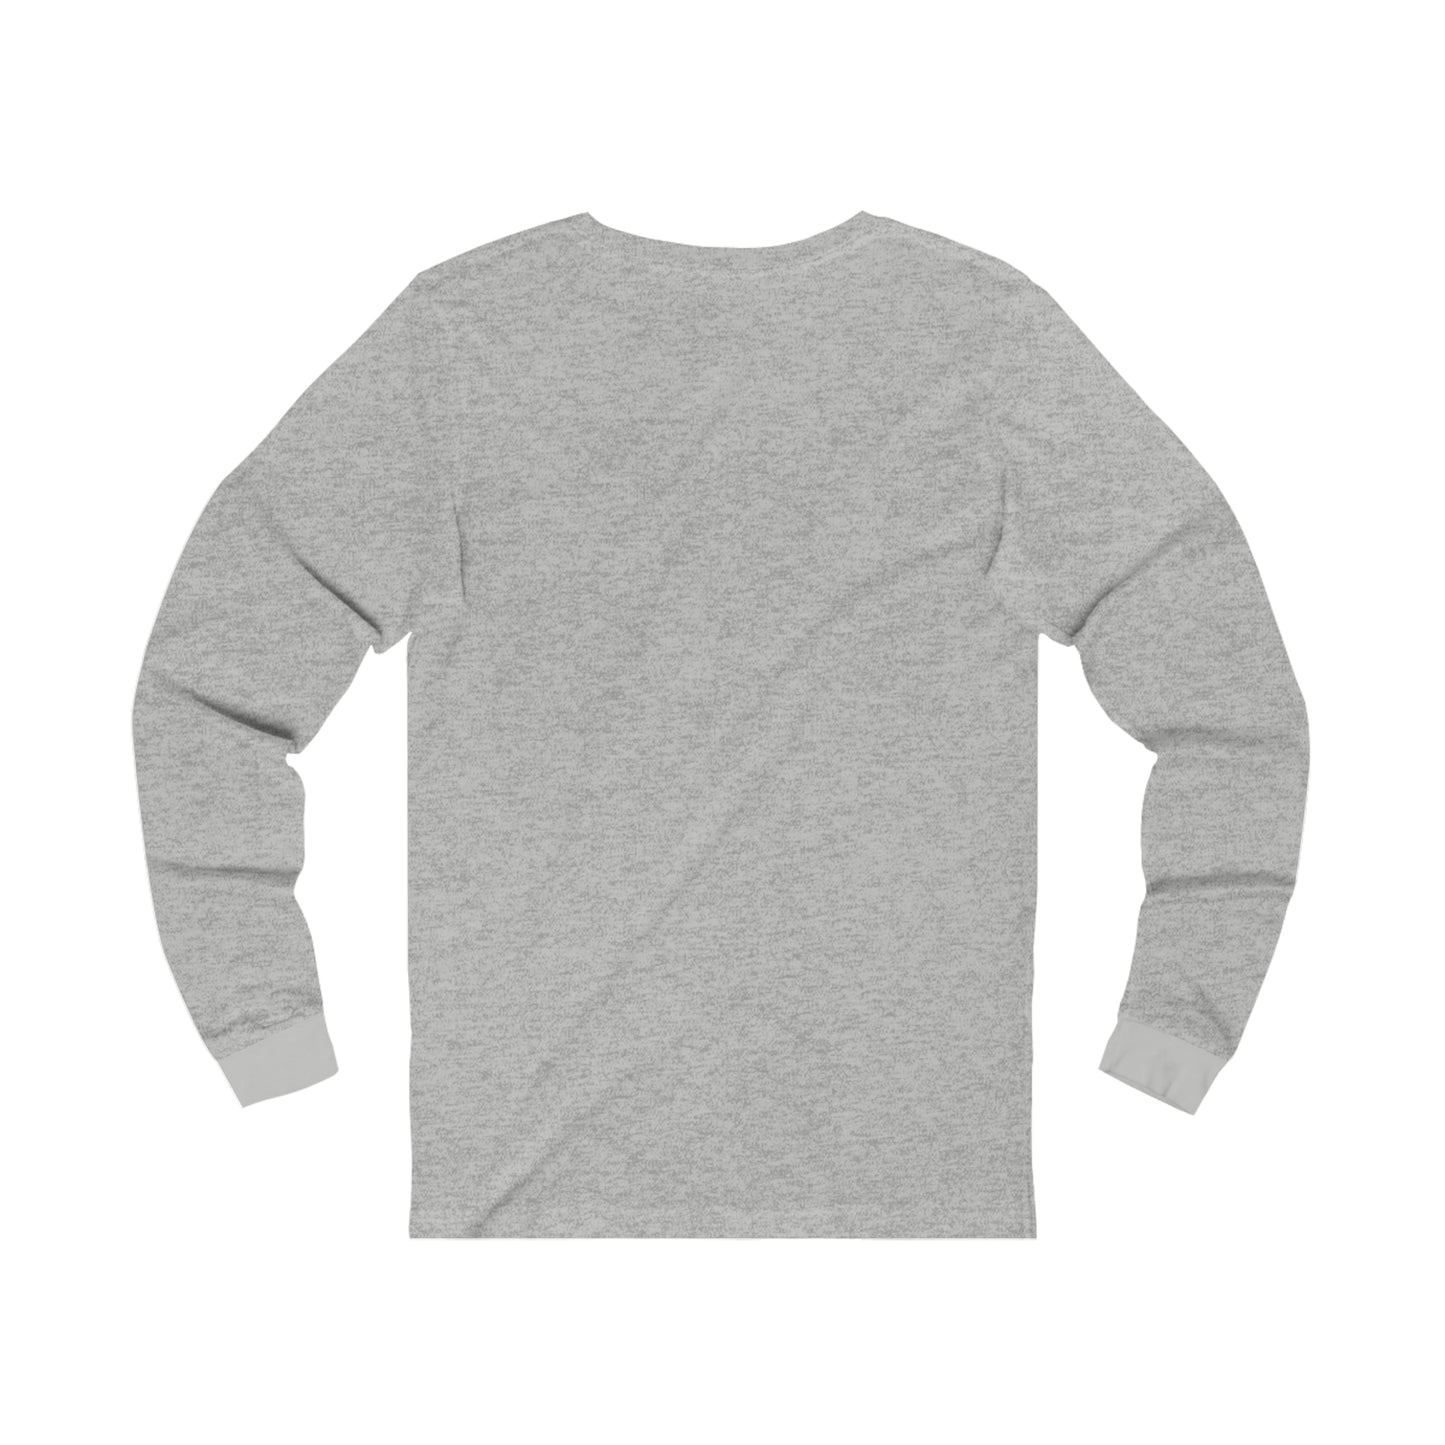 A Reason To Live - Unisex Jersey Long Sleeve Tee